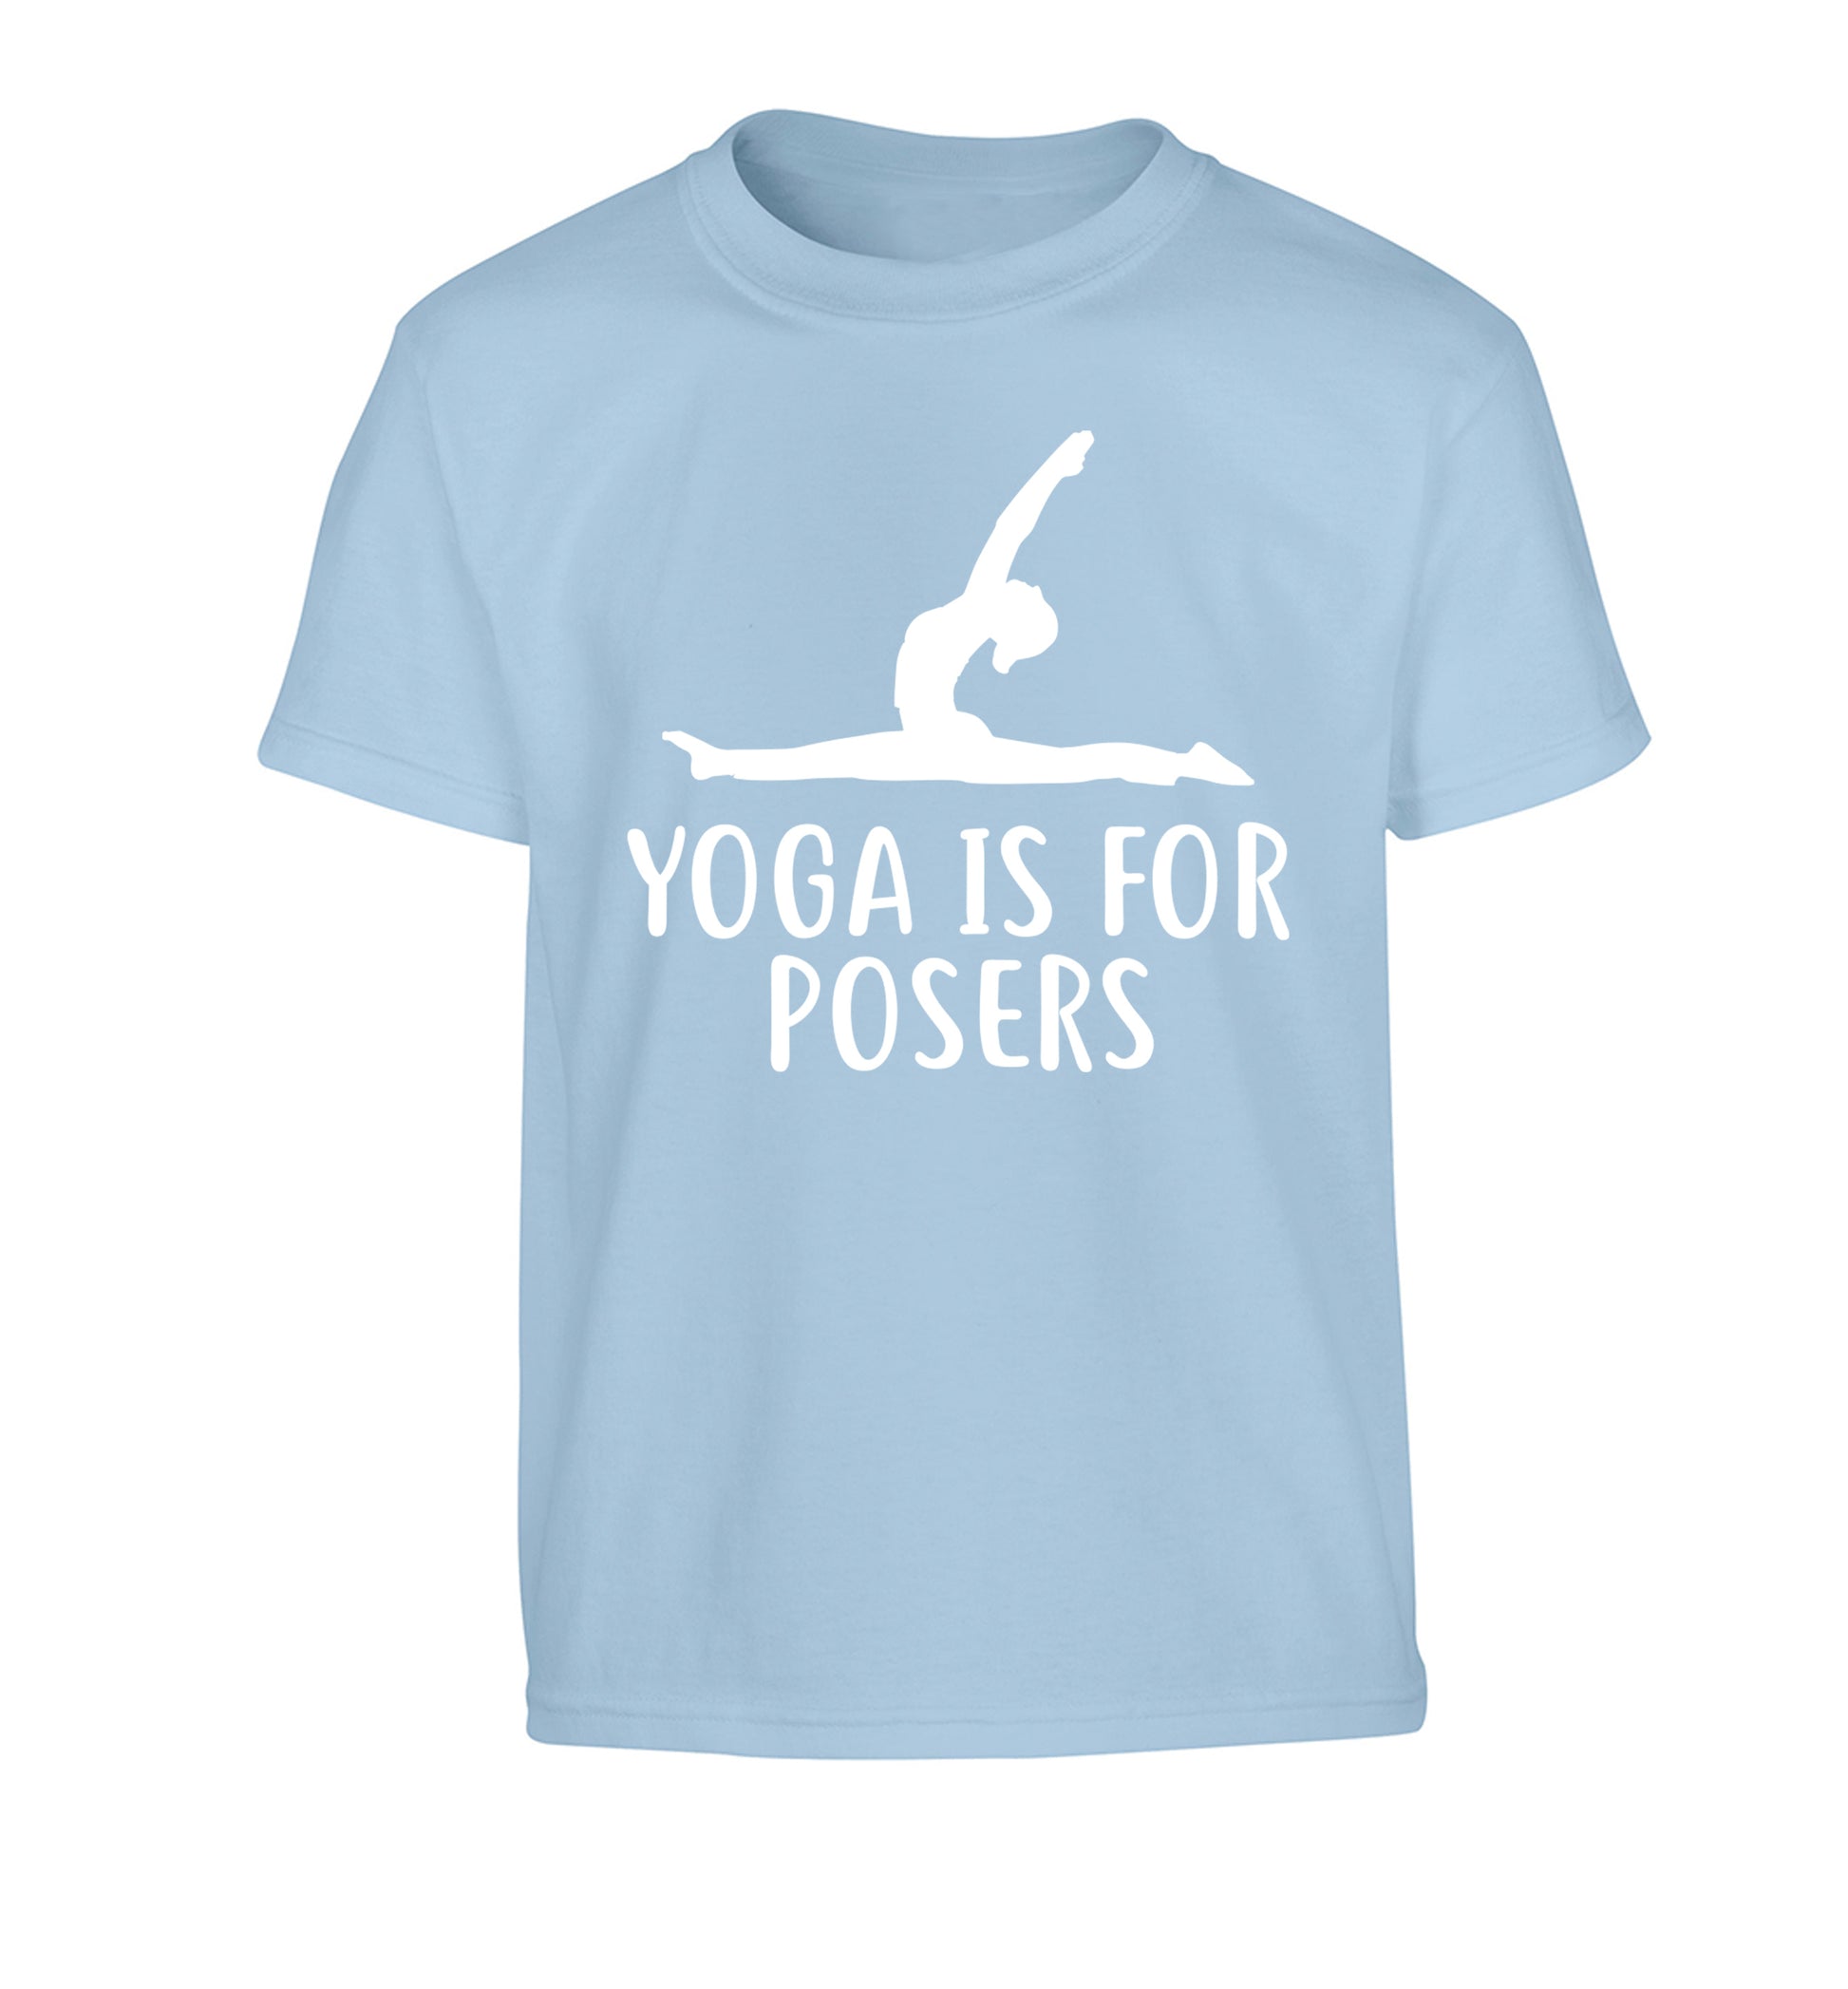 Yoga is for posers Children's light blue Tshirt 12-13 Years